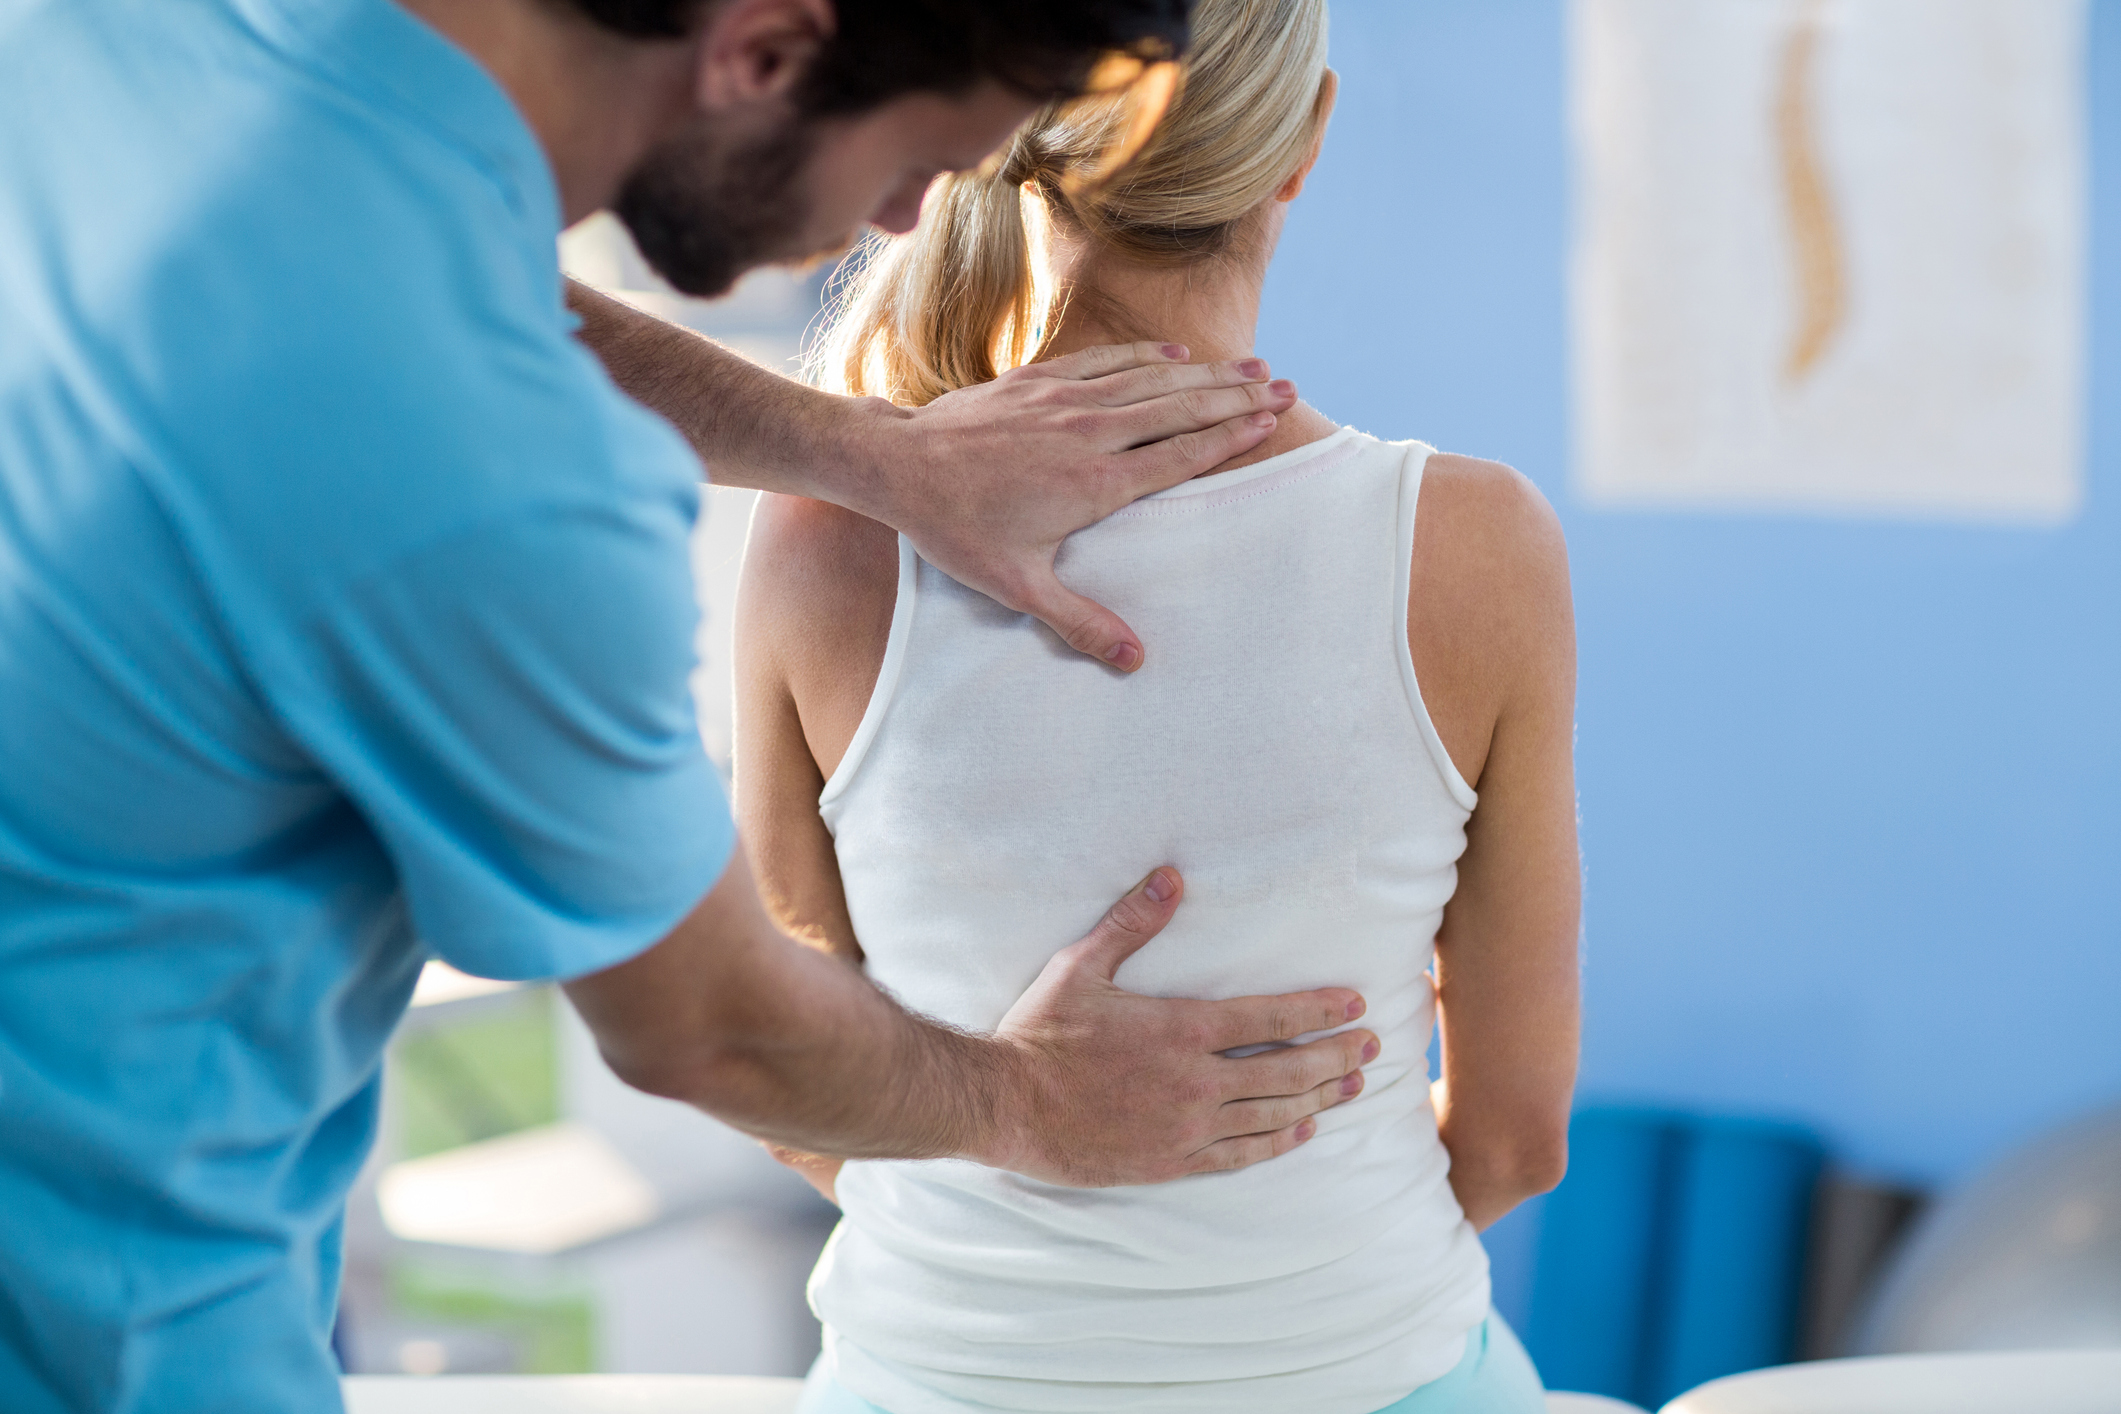 Male physiotherapist giving back massage to female patient (Thinkstock/PA)